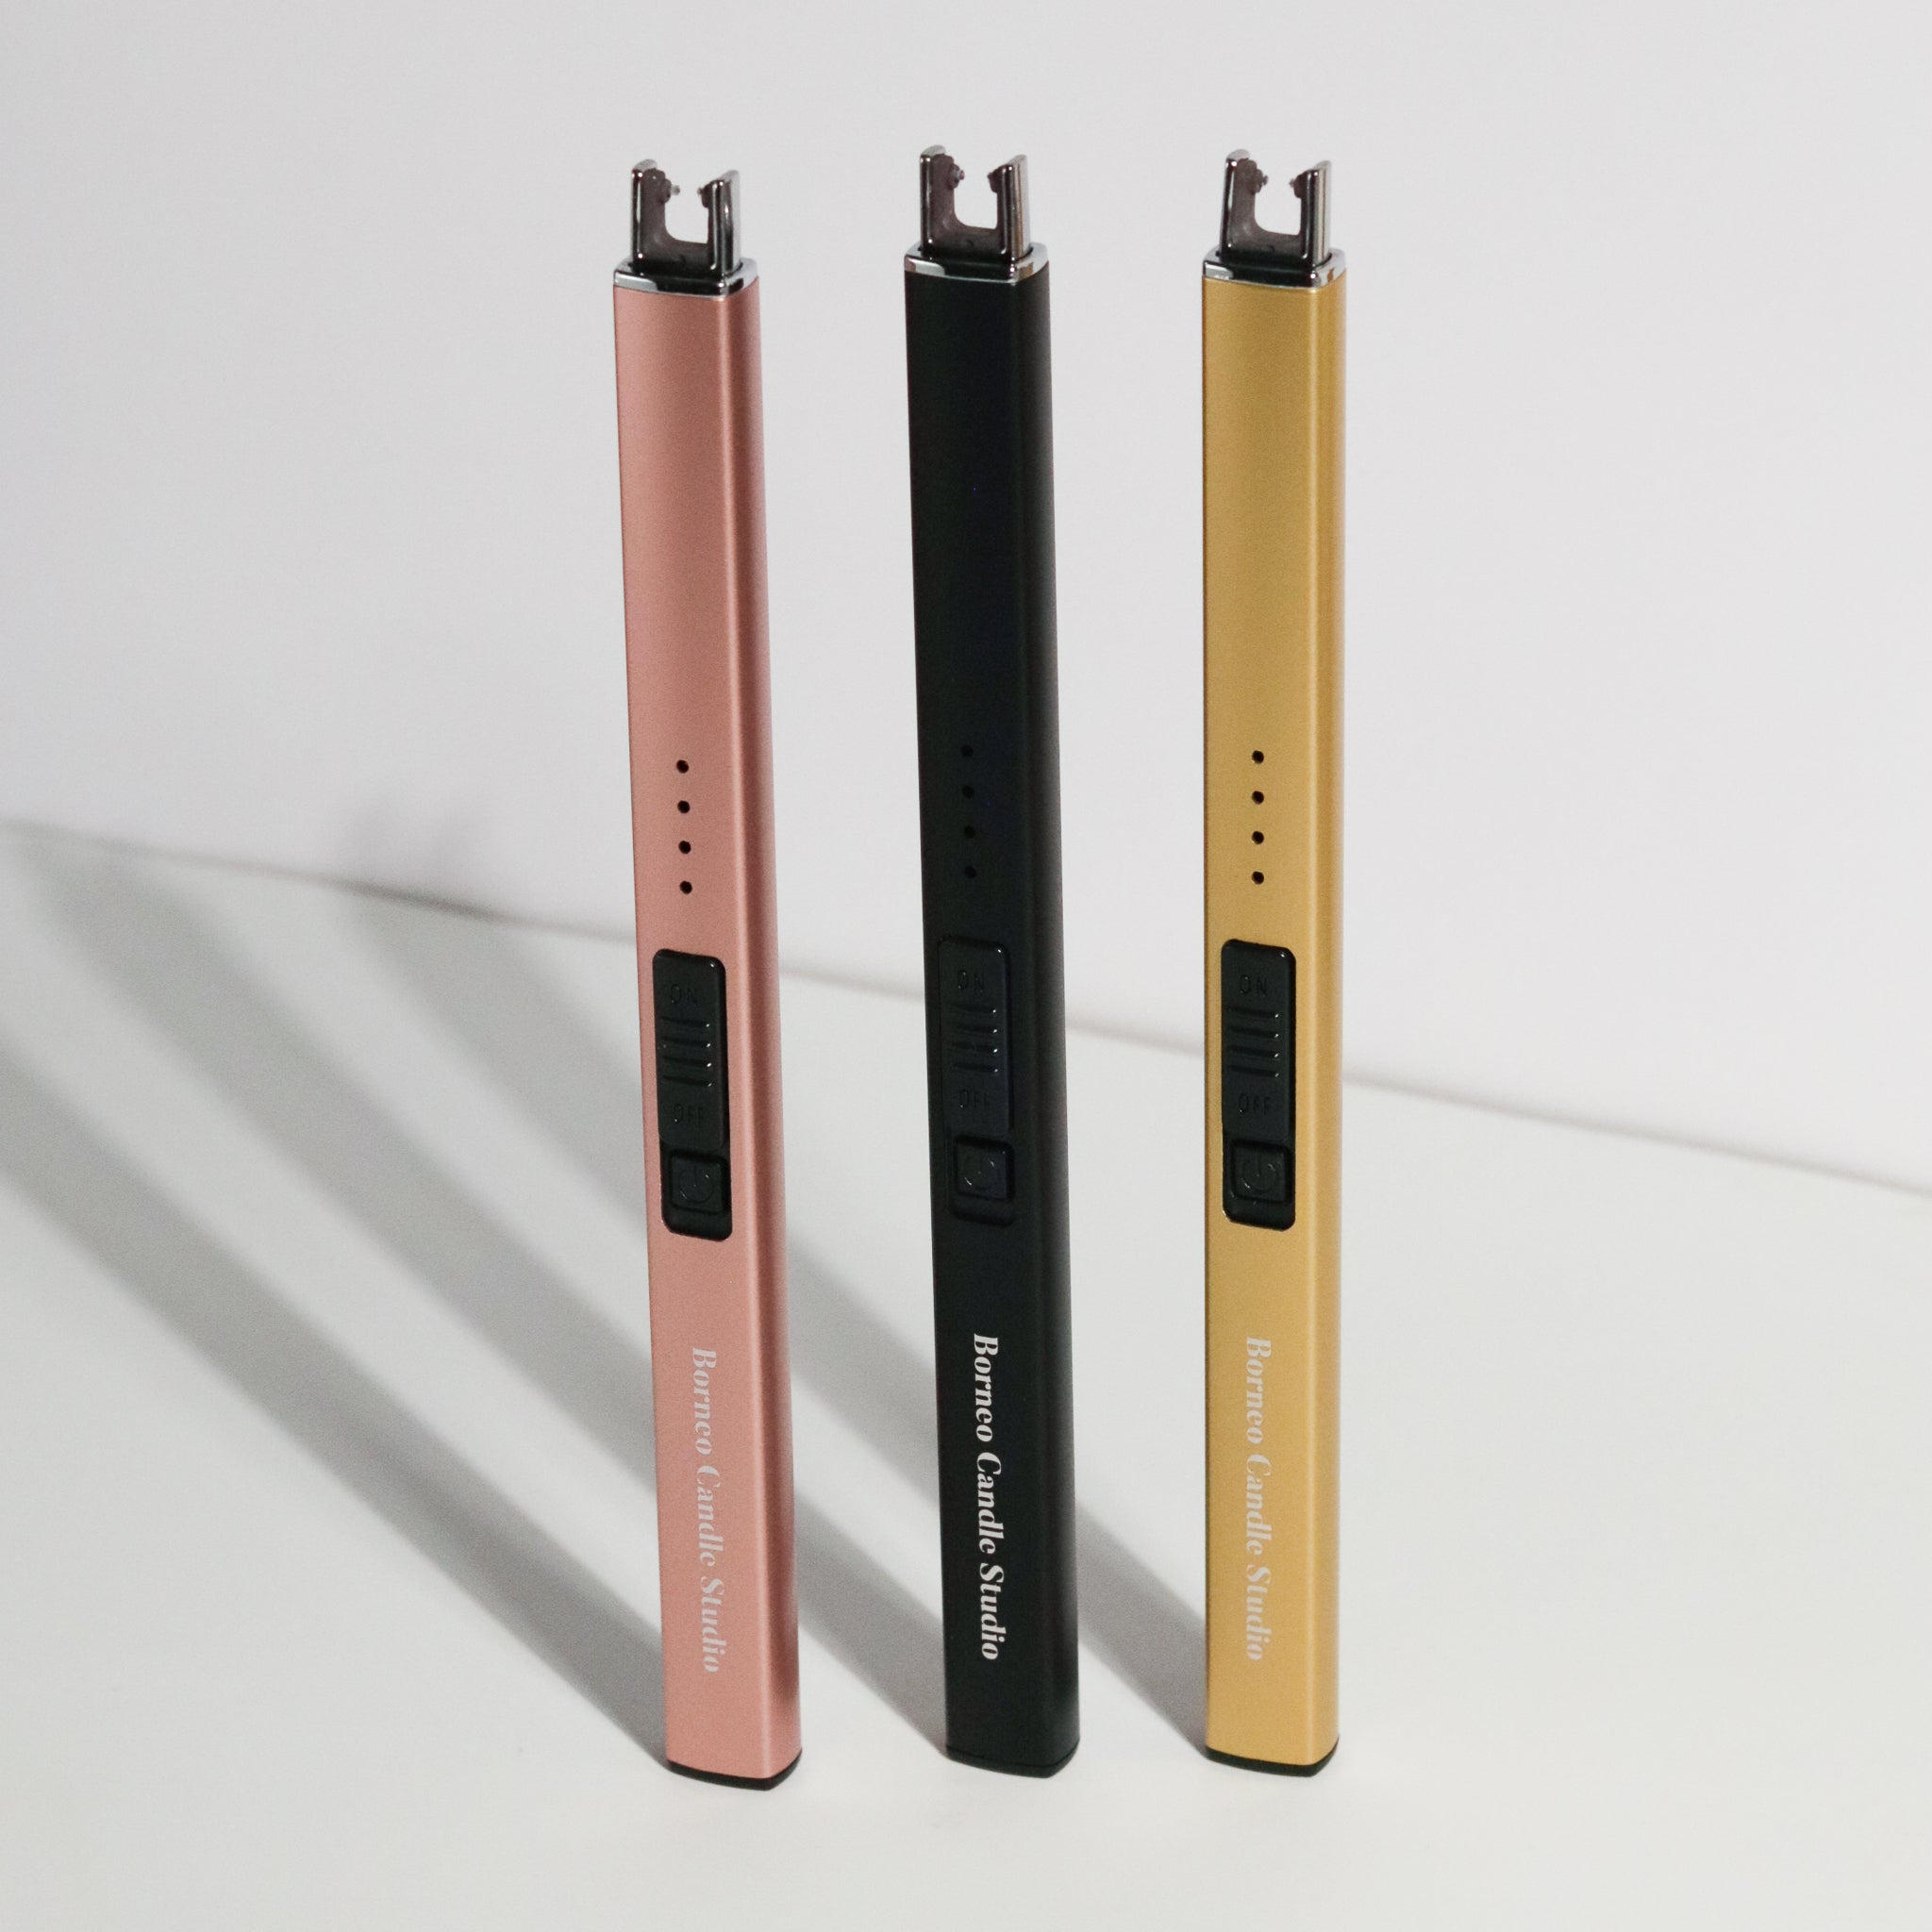 Flameless Electric USB Lighter in black, rose gold and gold from Borneo Candle Studio